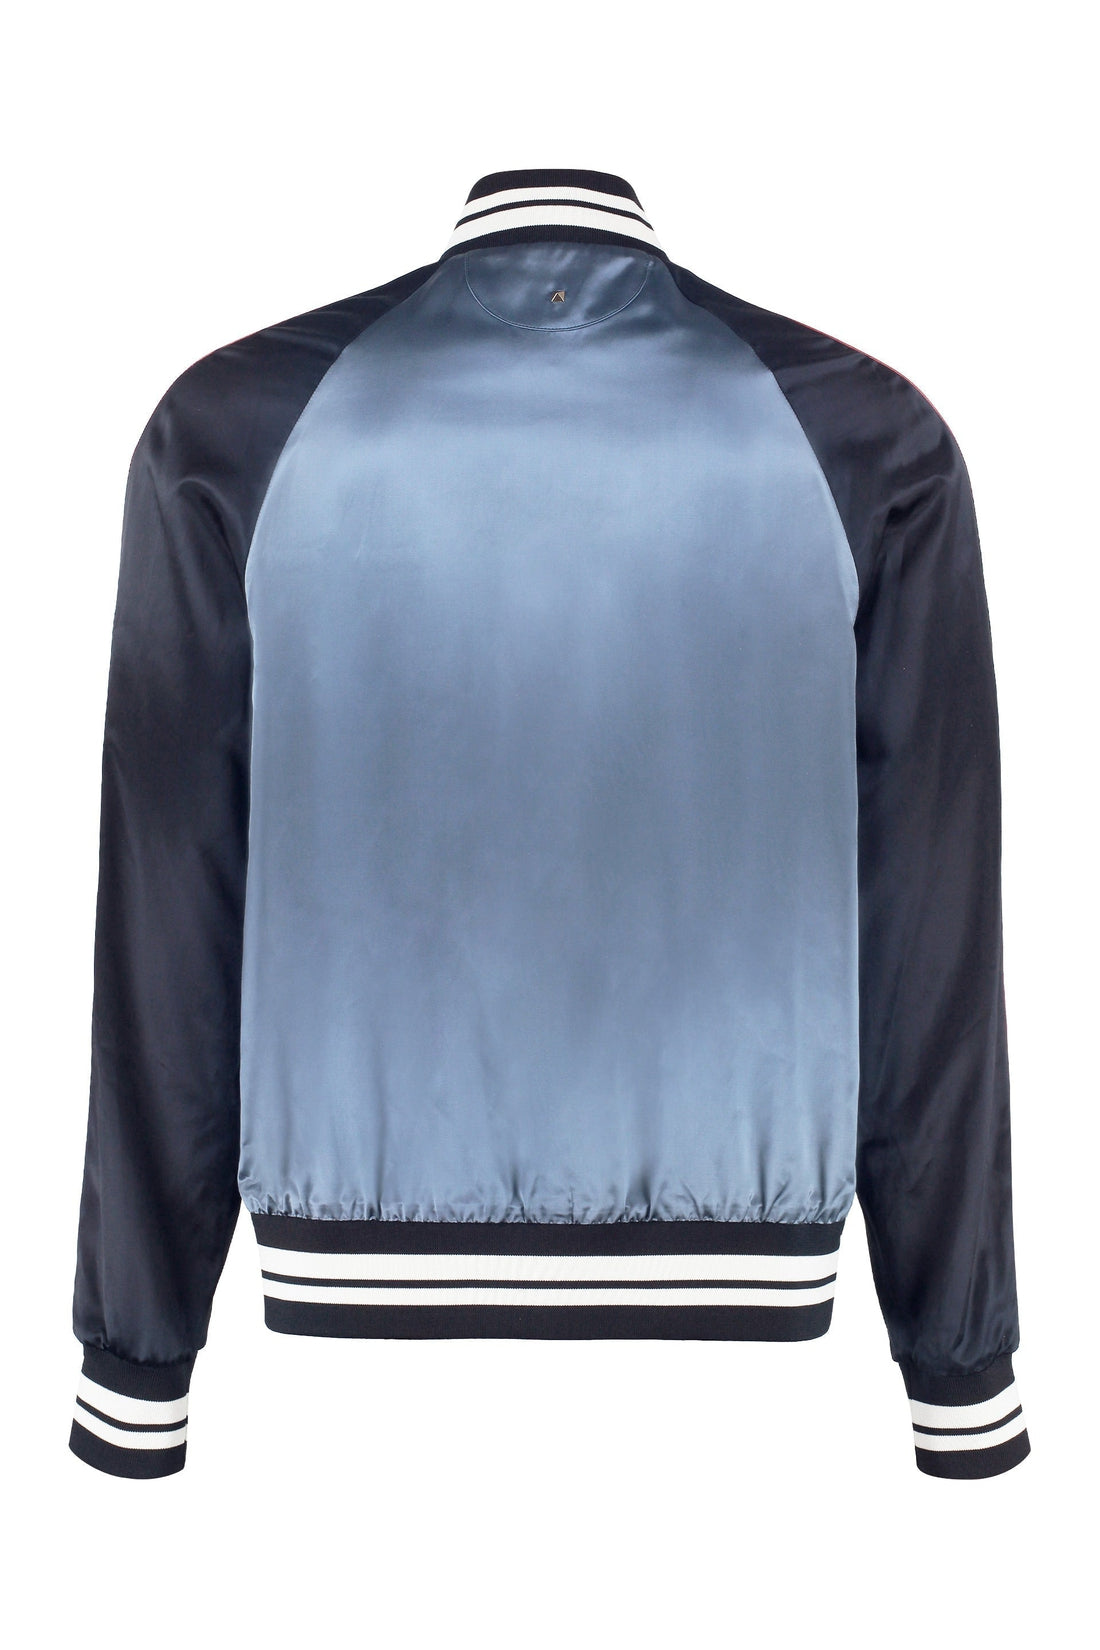 Valentino-OUTLET-SALE-Embroidered satin bomber-ARCHIVIST